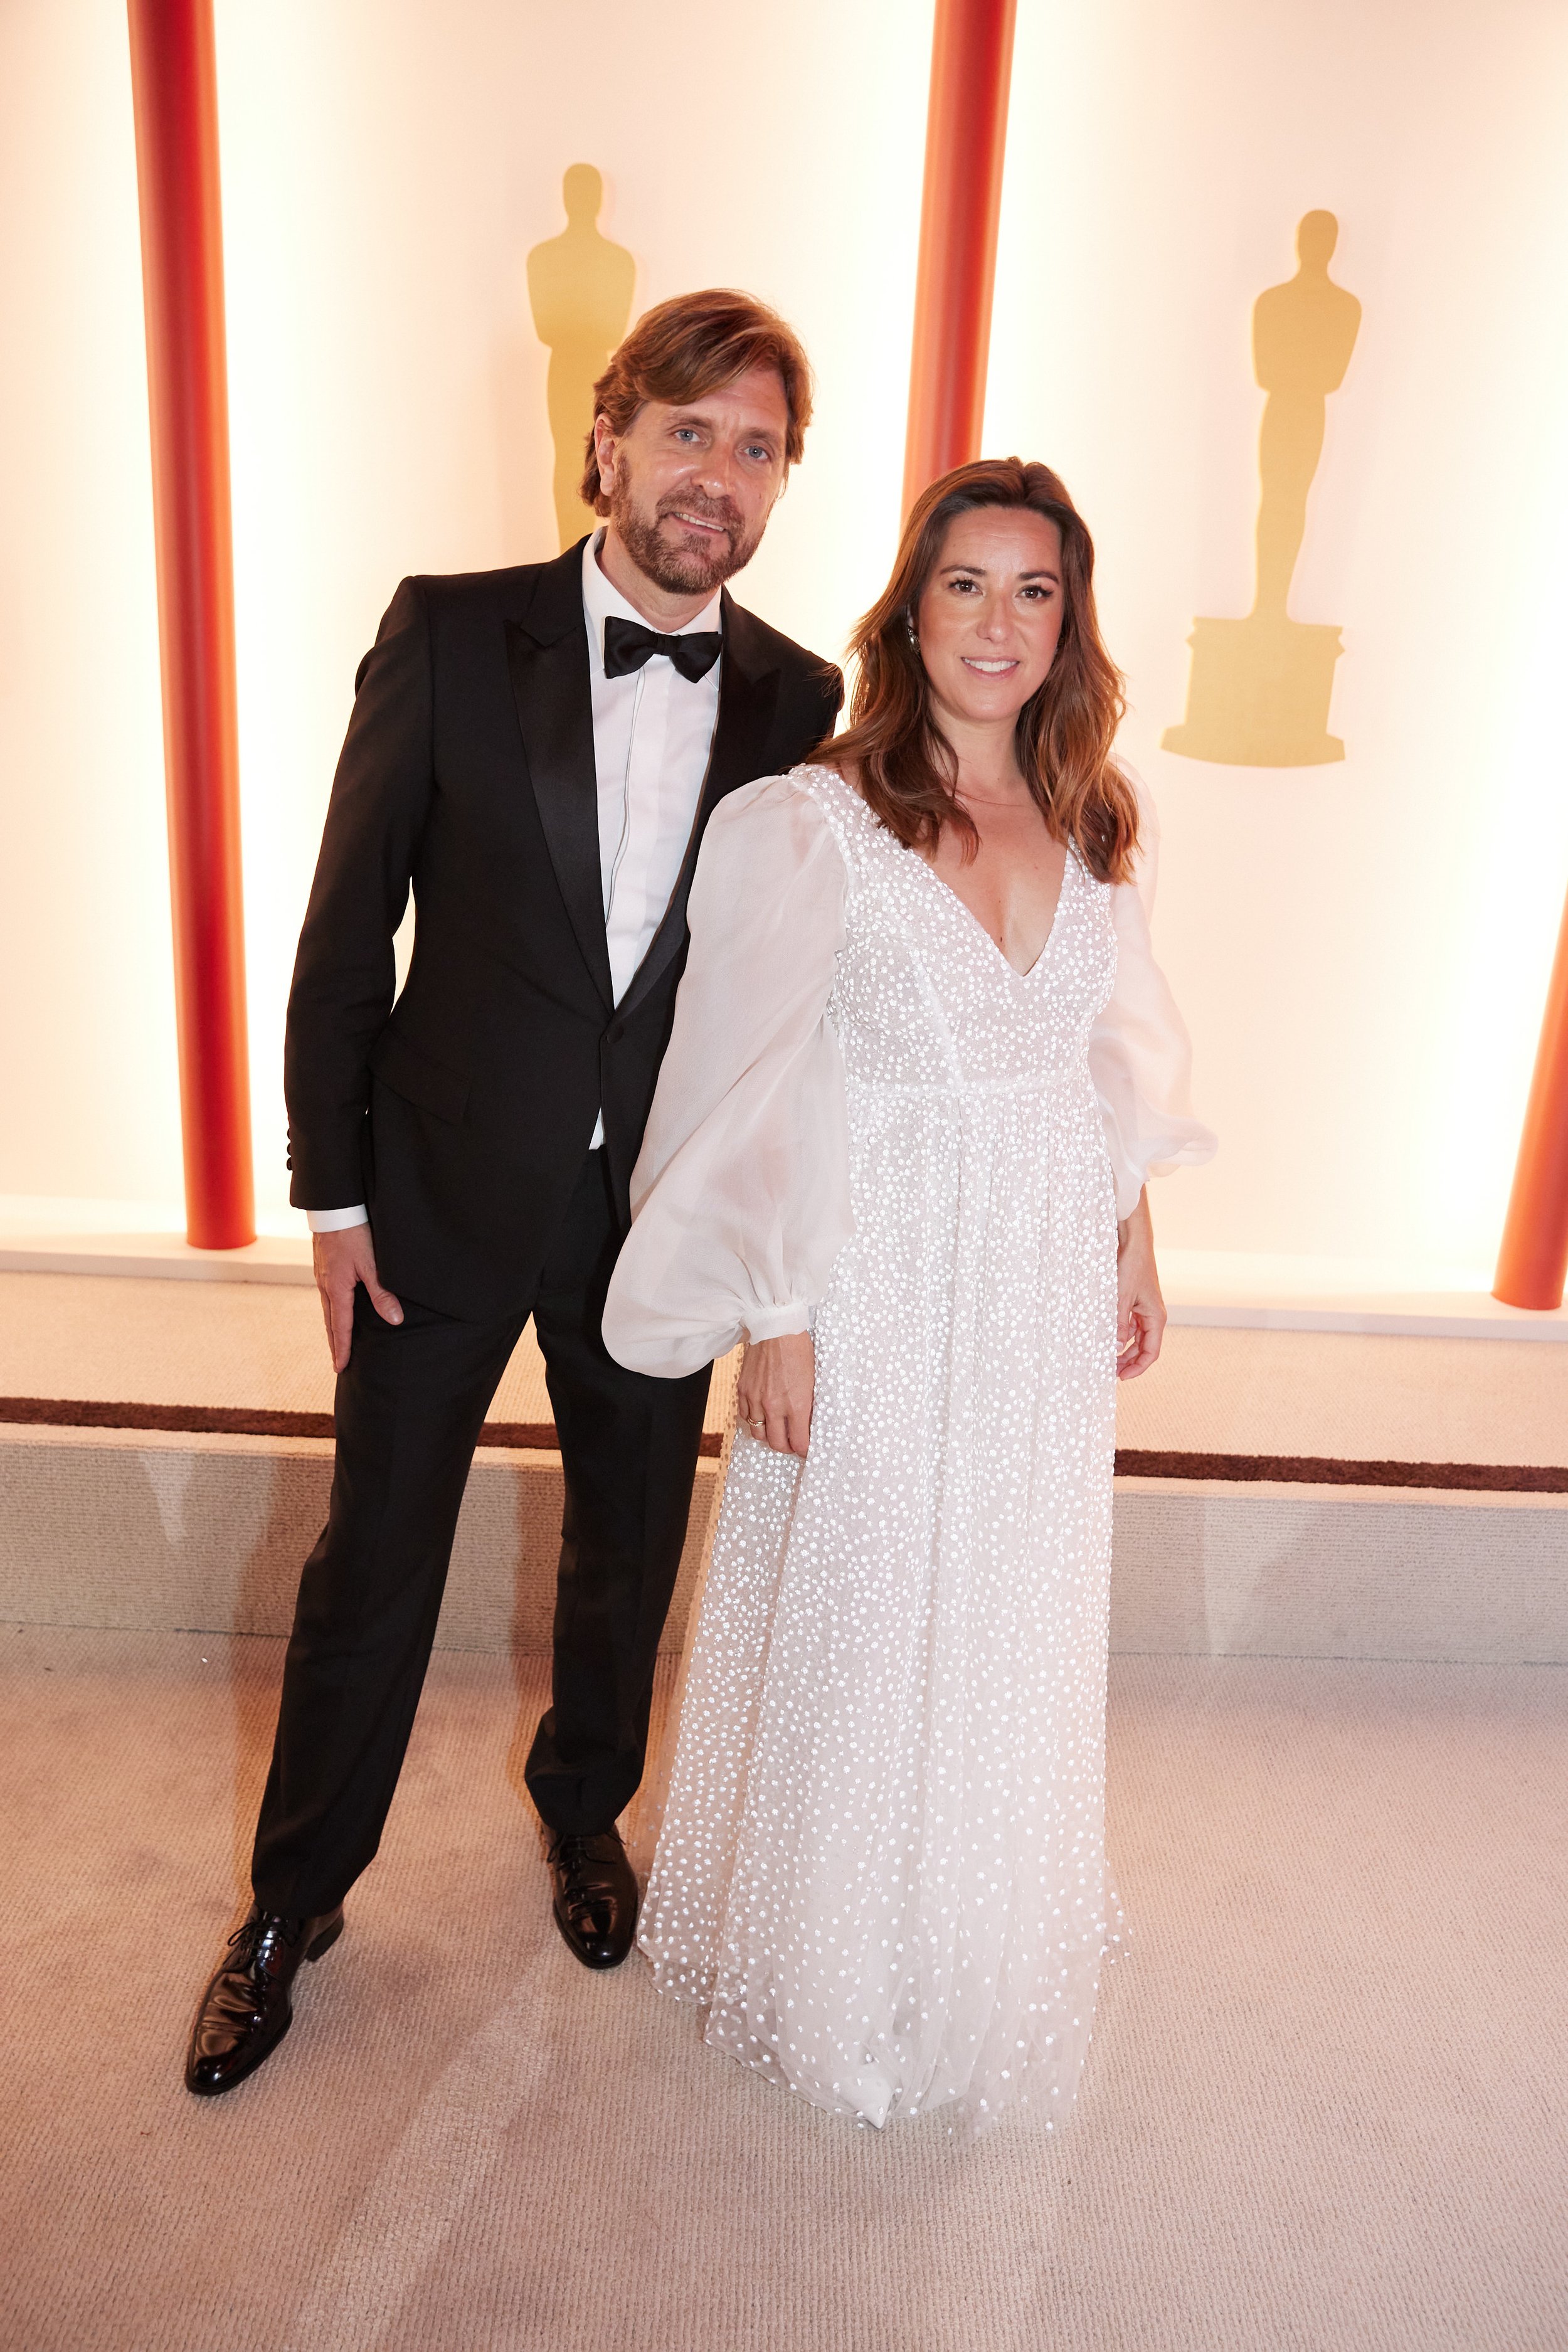 Oscar® nominee Ruben Östlund arrives with guest on the red carpet of The 95th Oscars® at the Dolby